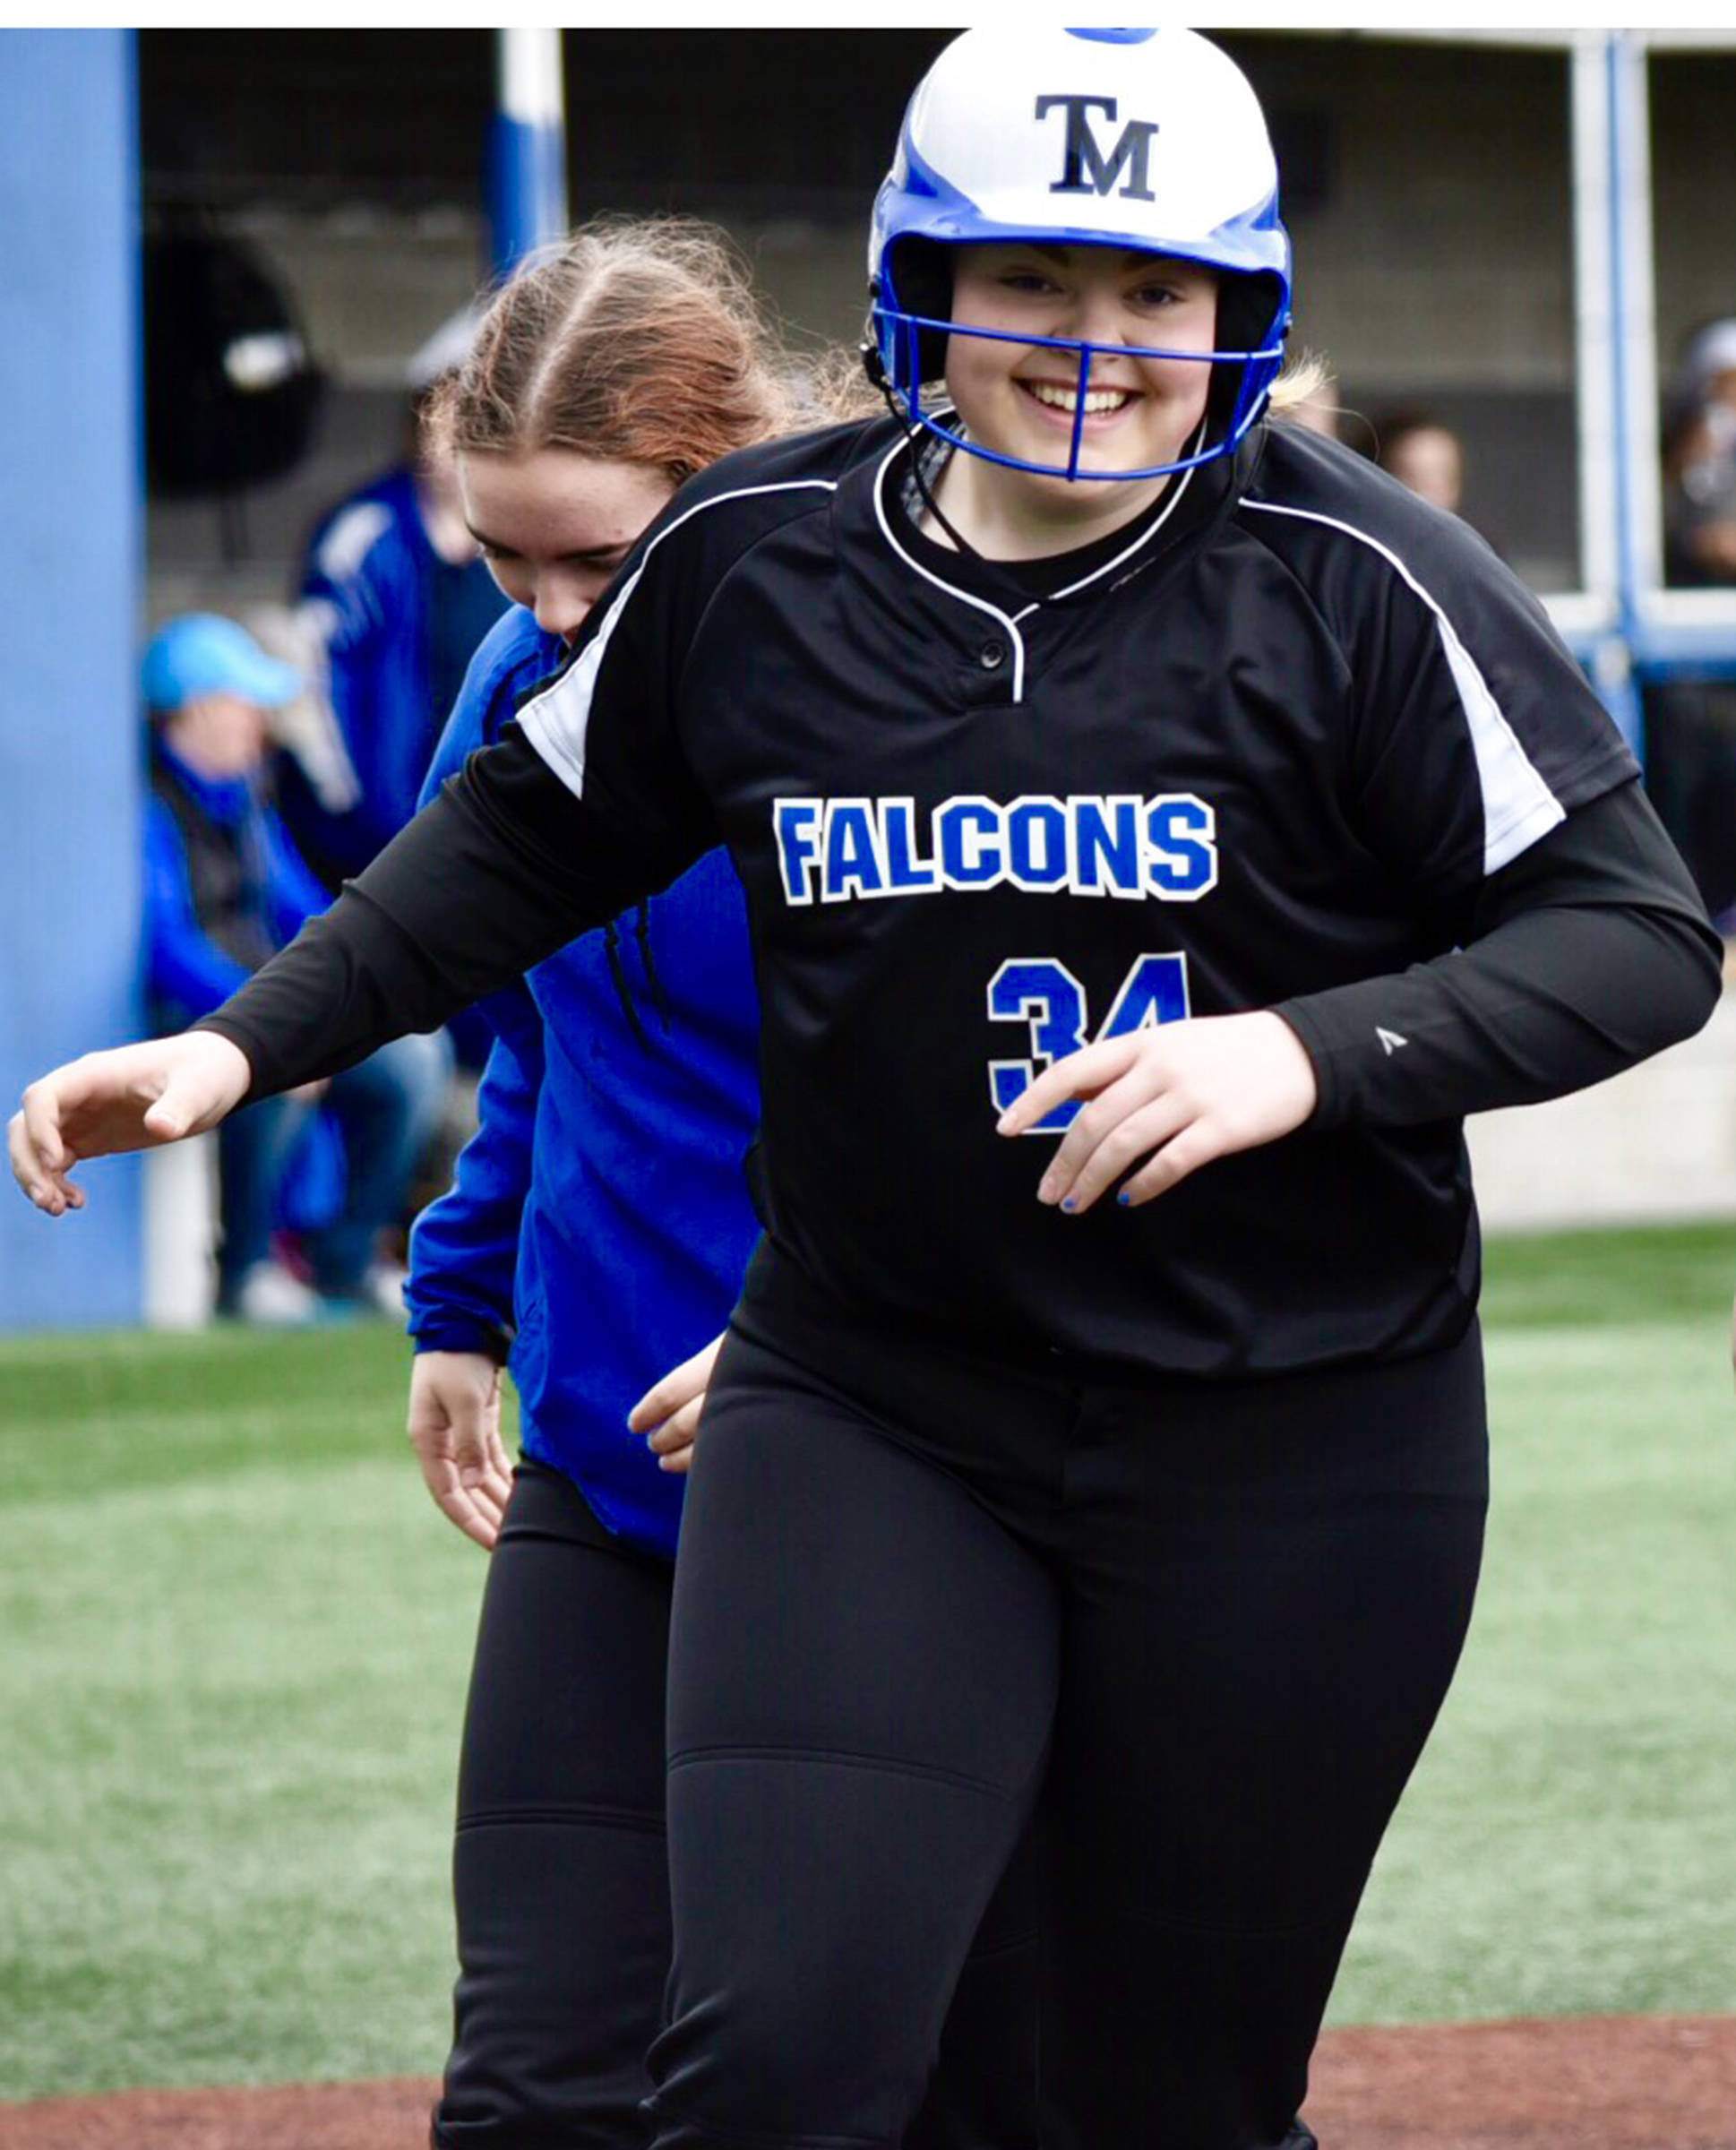 Thunder Mountain High School freshman Aspen Kasper runs across home plate after hitting a home run in the top of the third inning against Sitka at Moller Field on Friday, April 26, 2019. (Courtesy Photo | Sharla Hayes)